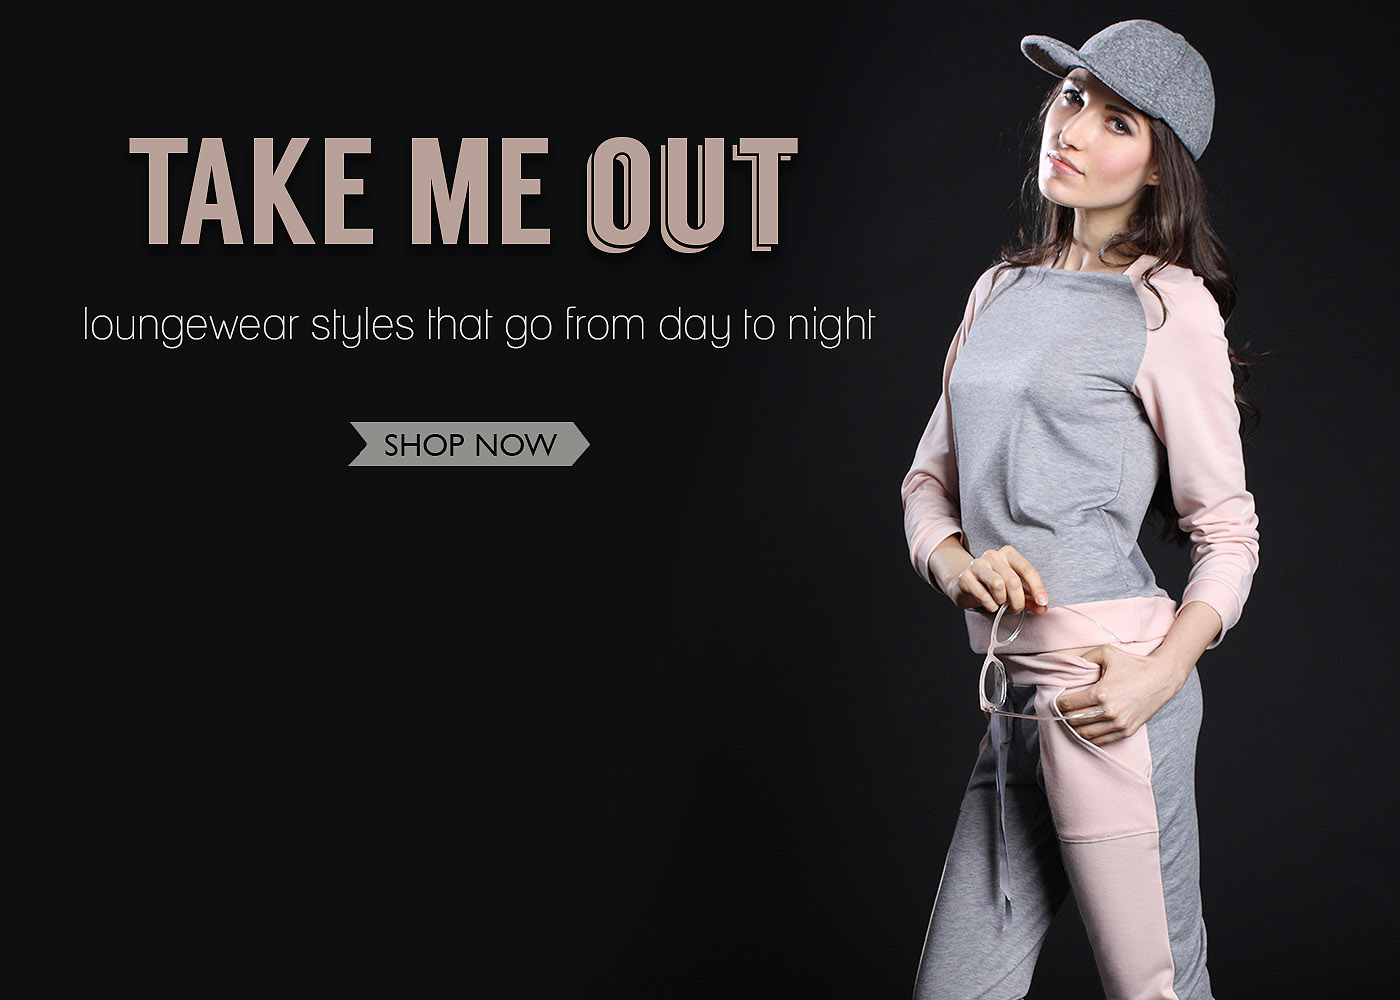 Take me out - new loungewear early summer 2015 